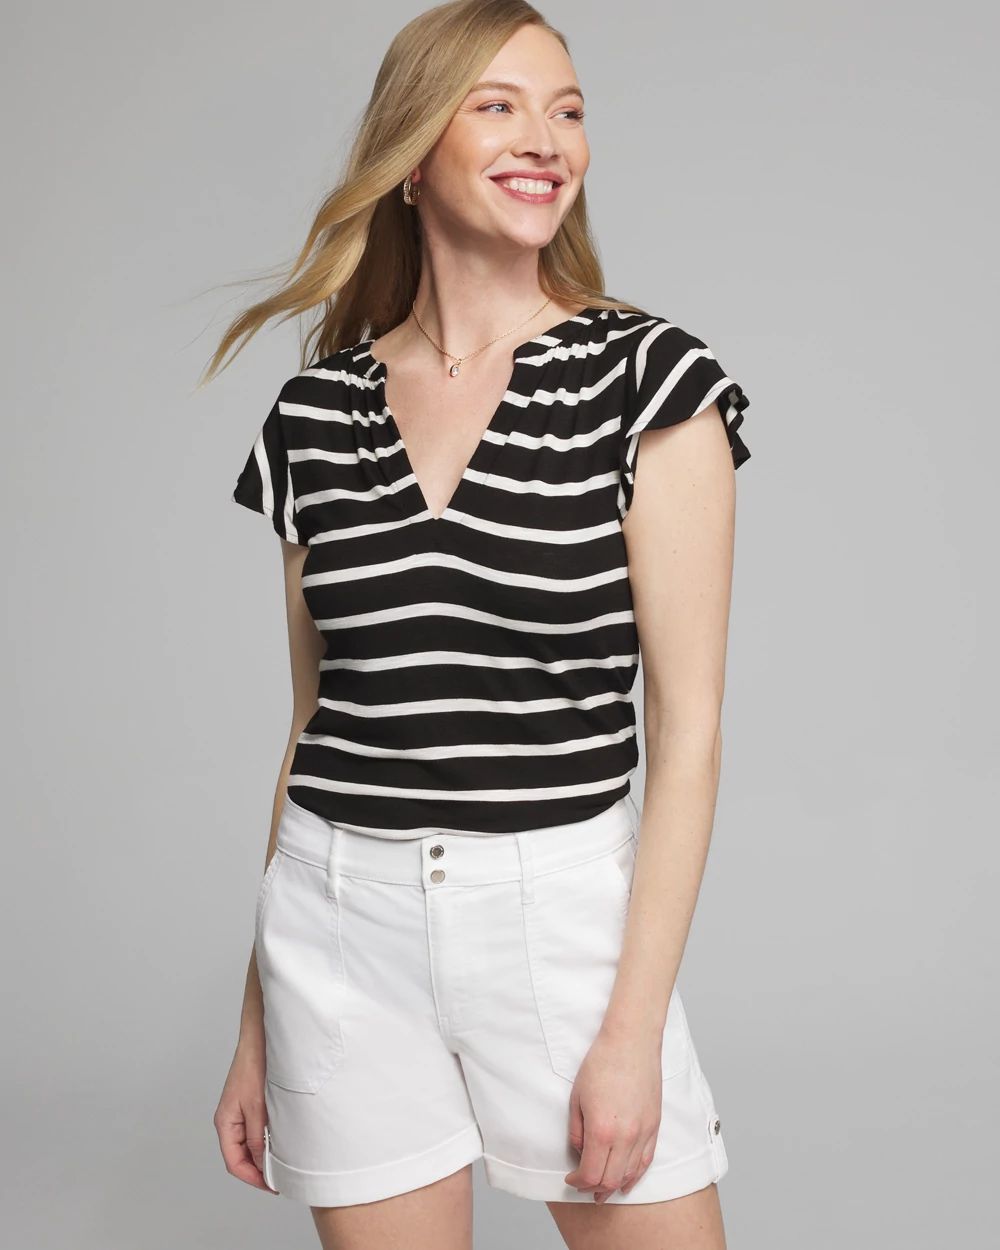 Outlet WHBM Ruffle Tee